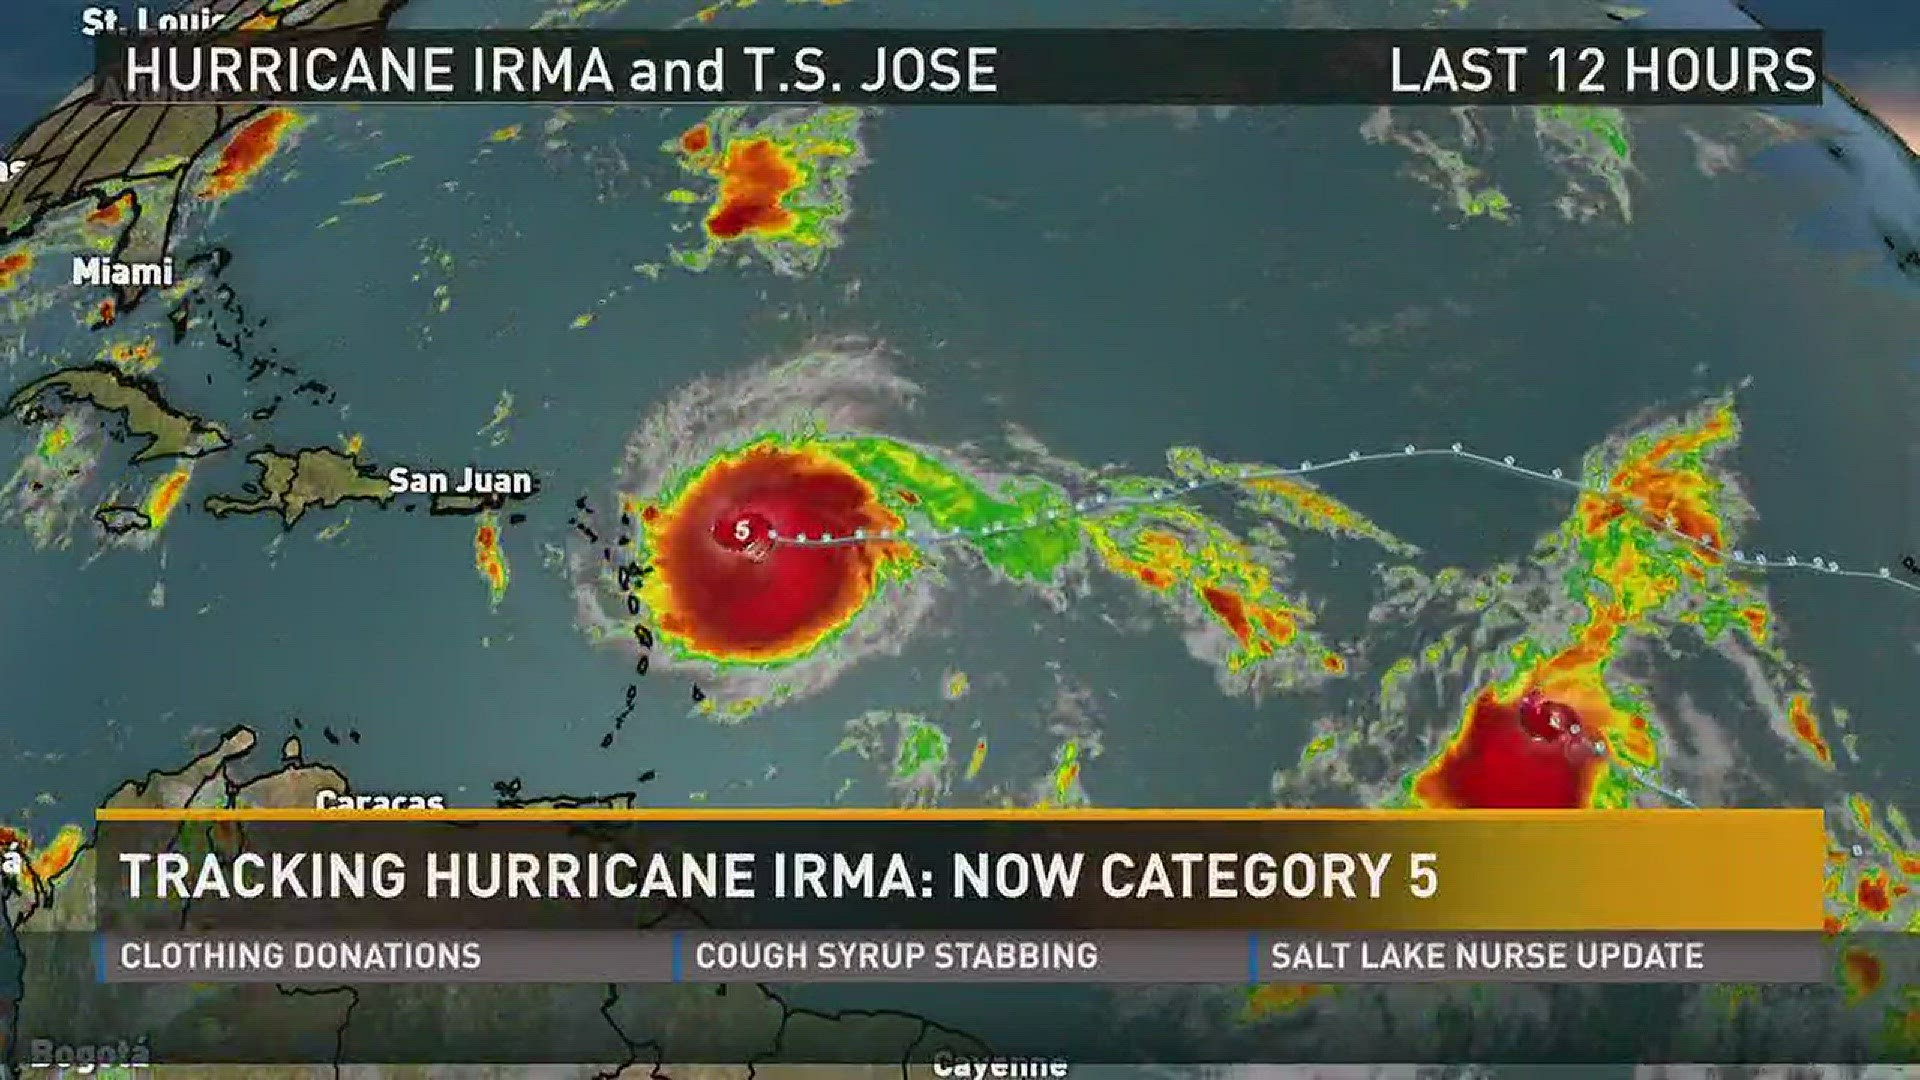 A Facebook post that's been widely shared claims that Hurricane Irma will be a Category 6, which doesn't even exist.